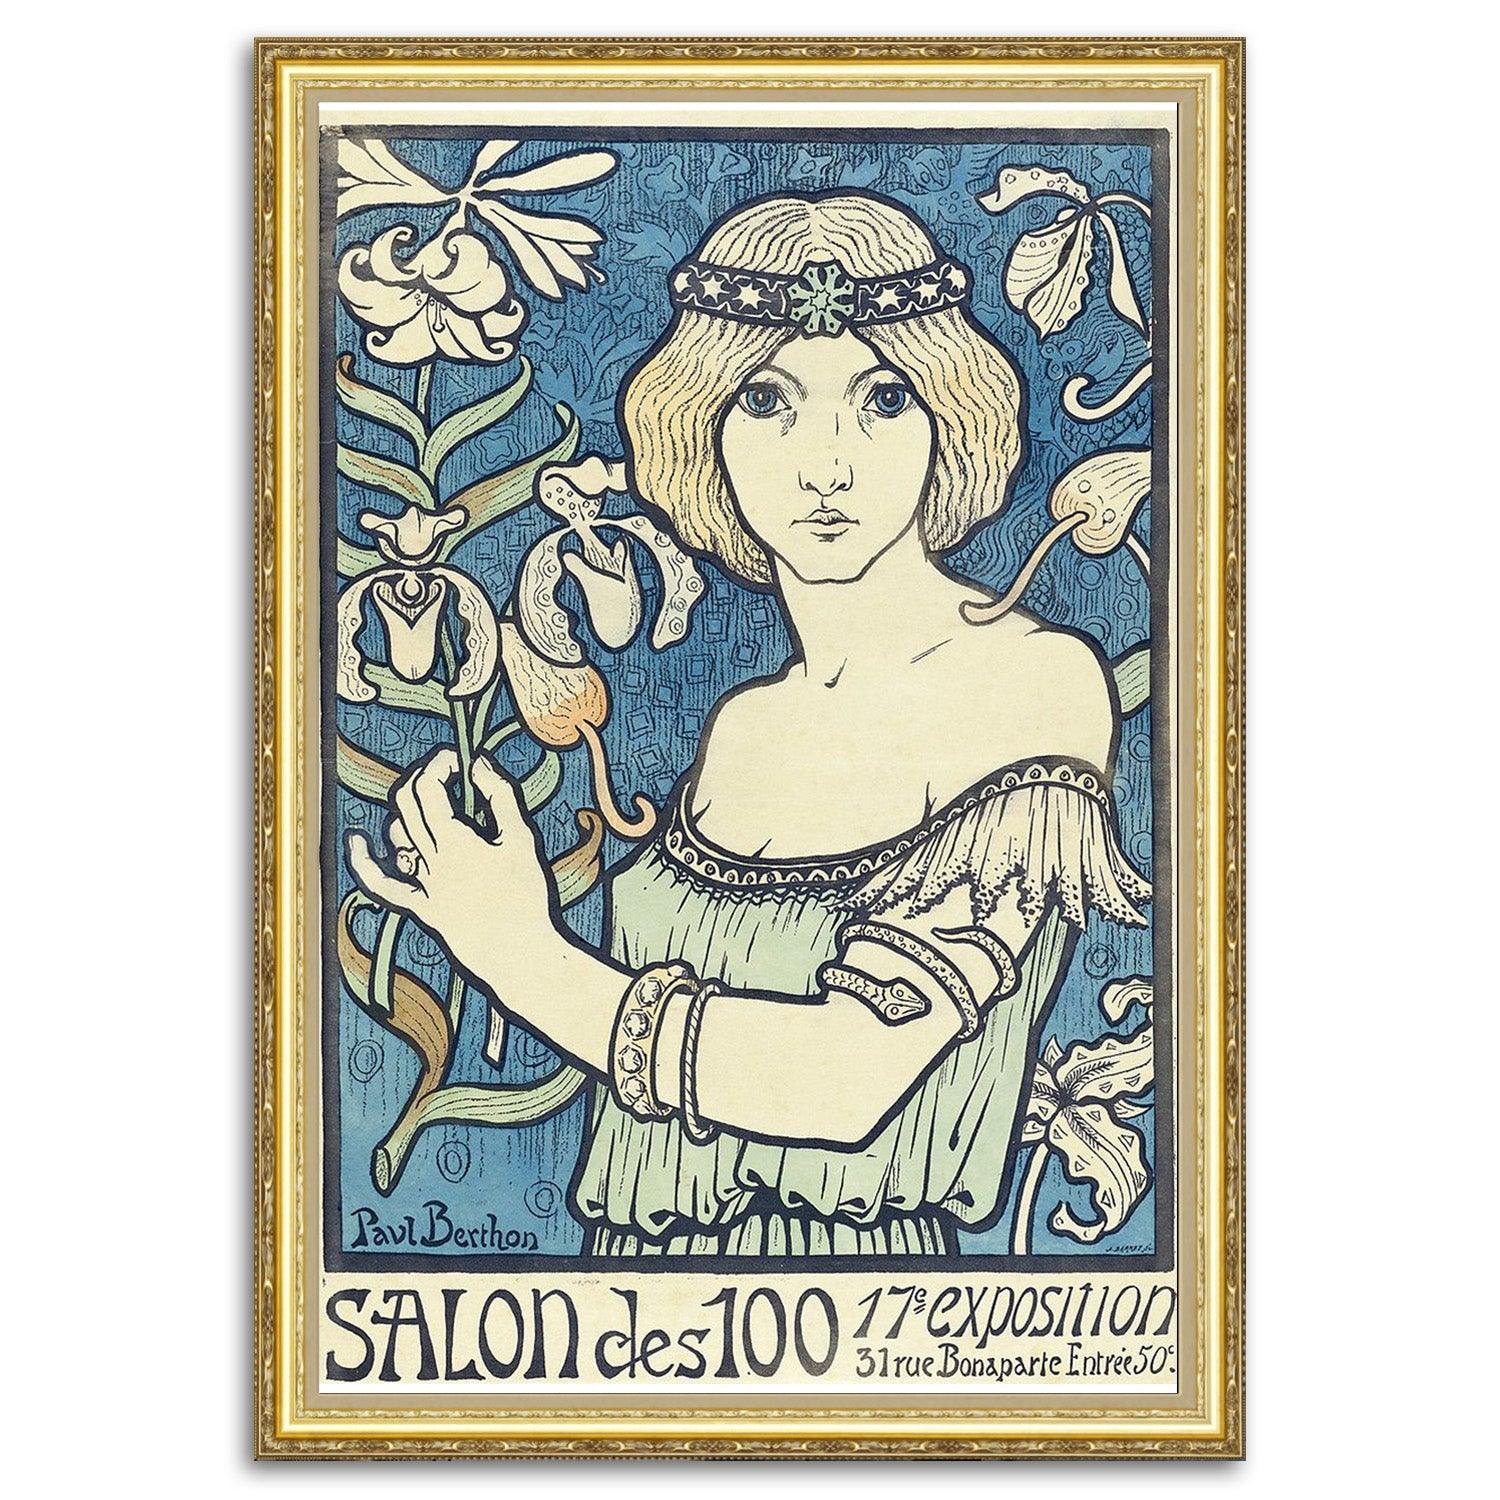 Give your home decor a touch of elegance through our exquisite Salon des Cent 17th Exposition poster reproduction poster. The artwork is a collage with the illustration for the poster for the 17th exhibition of works by Grasset created by Paul Berthon (French graphic designer, ca. 1872-1934).